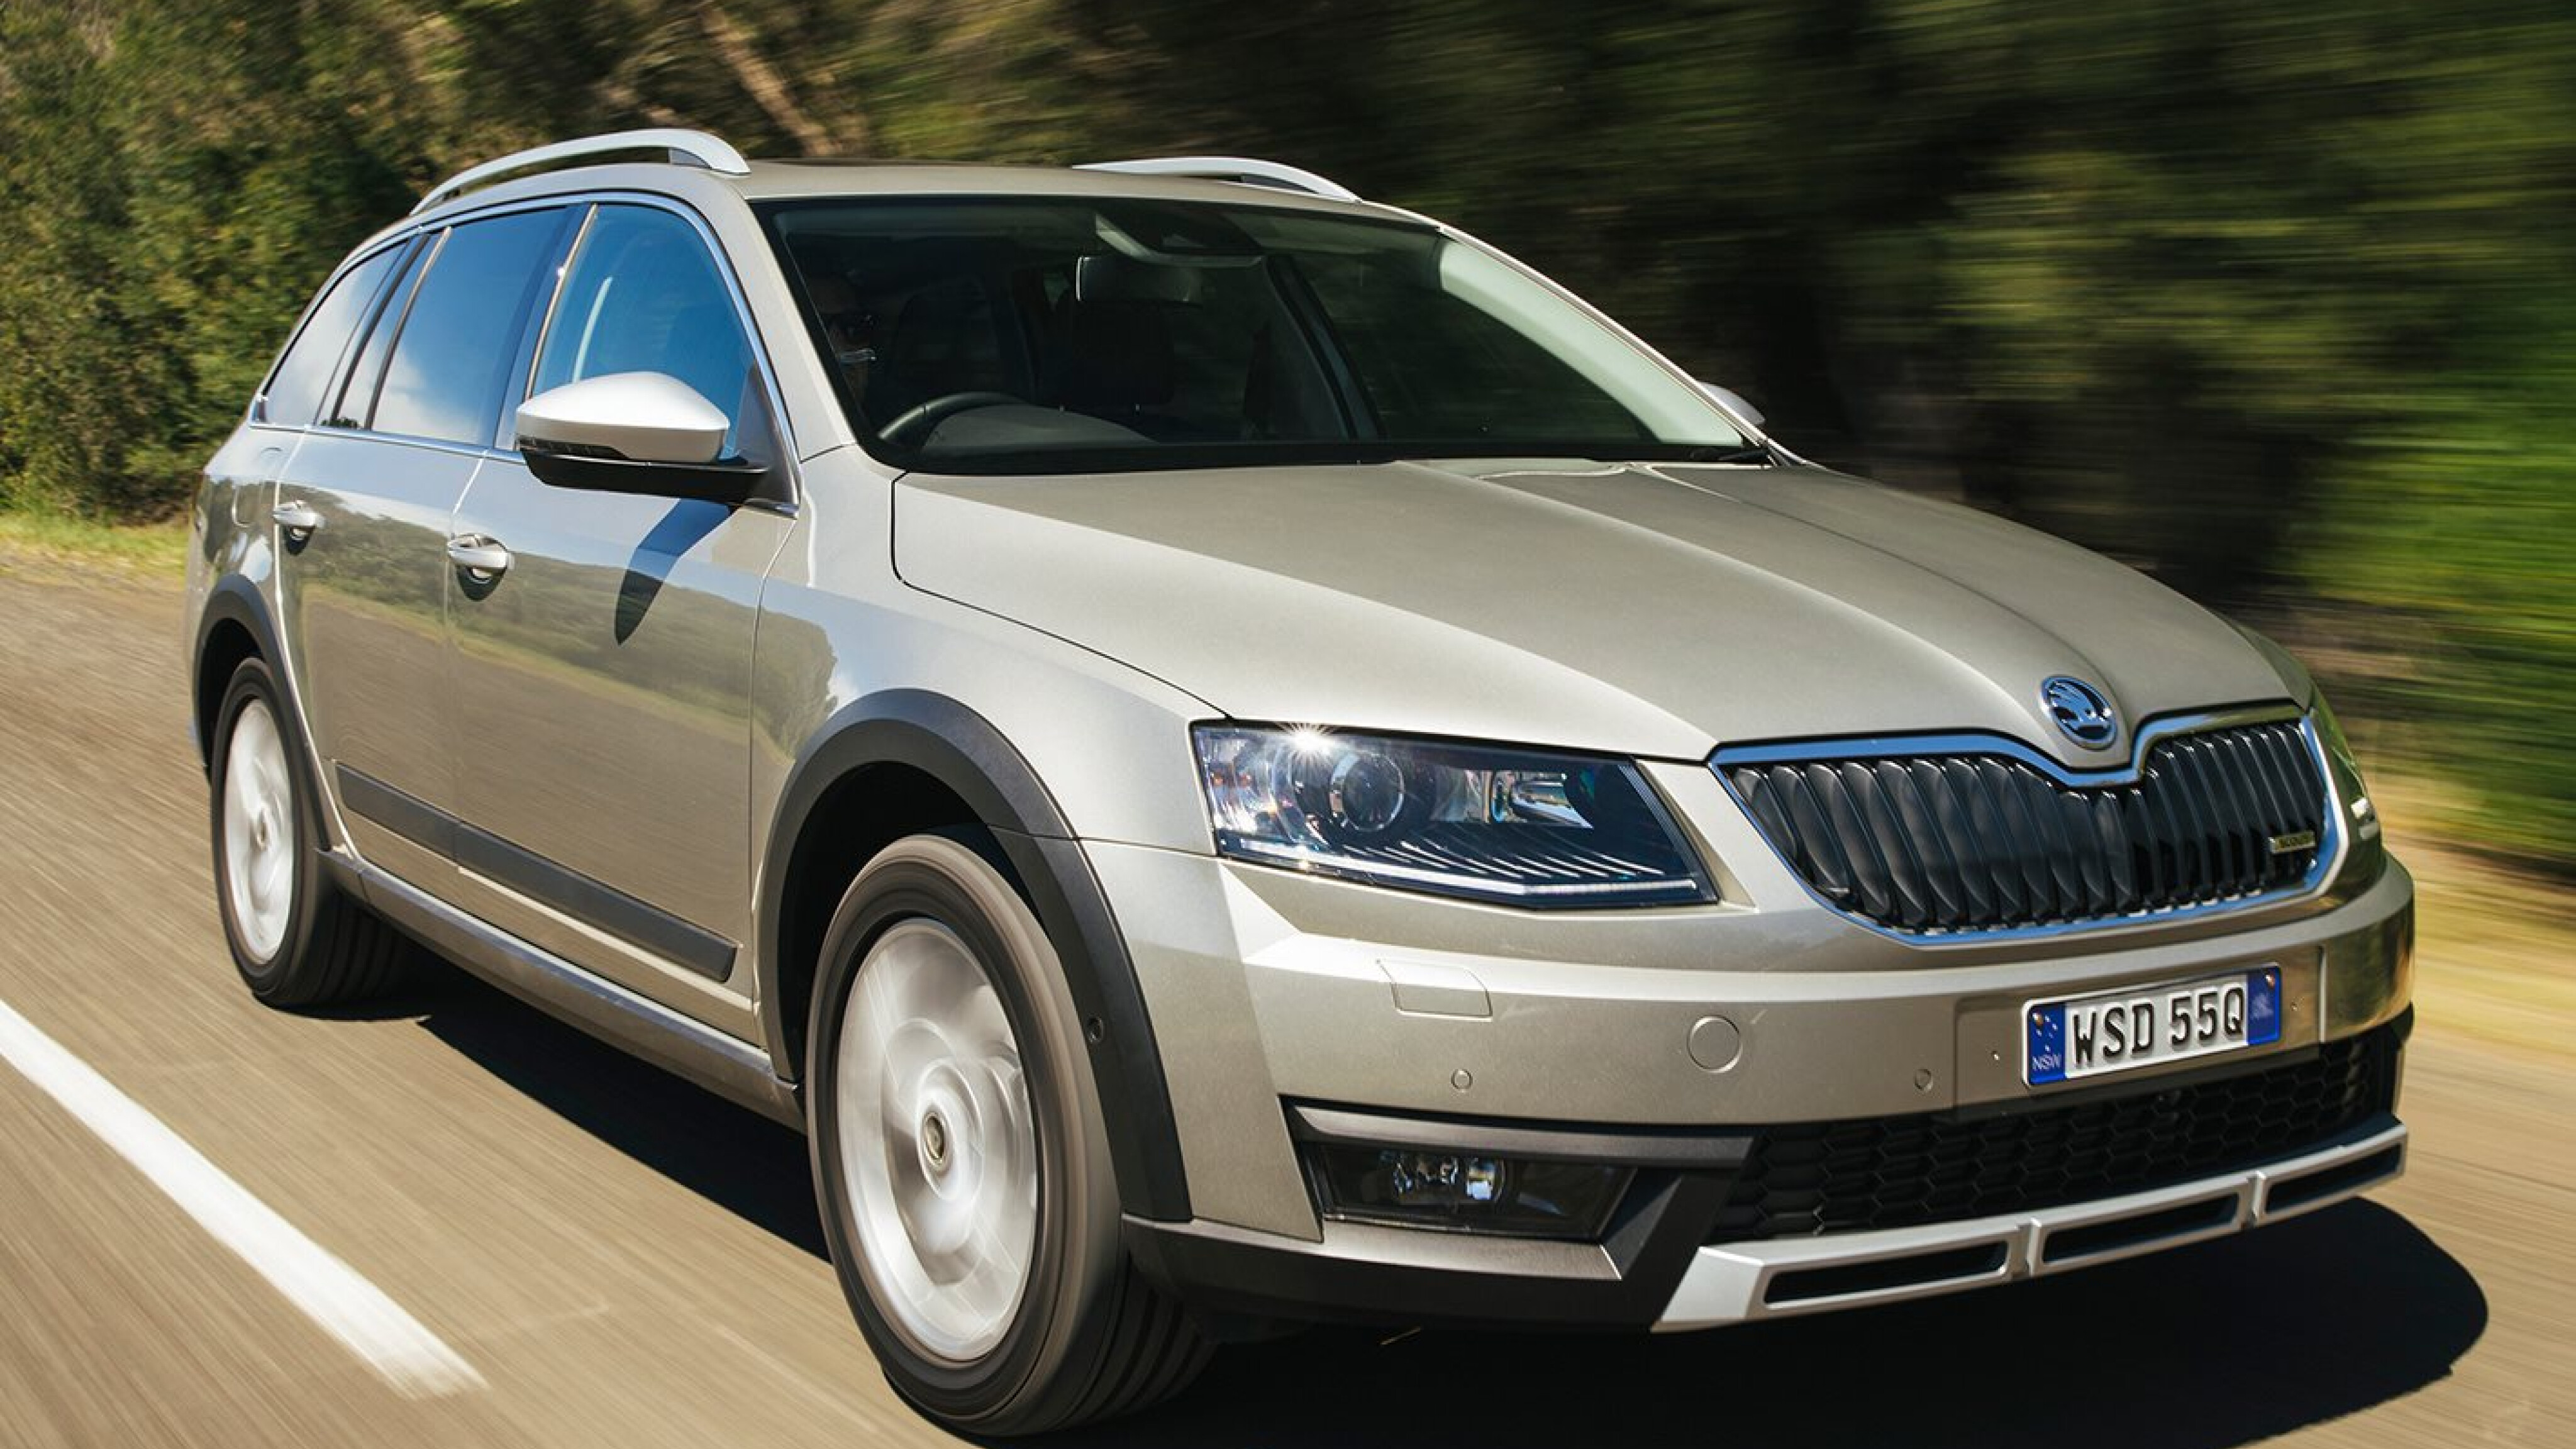 2015 Skoda Octavia Scout 4x4 First Drive Review